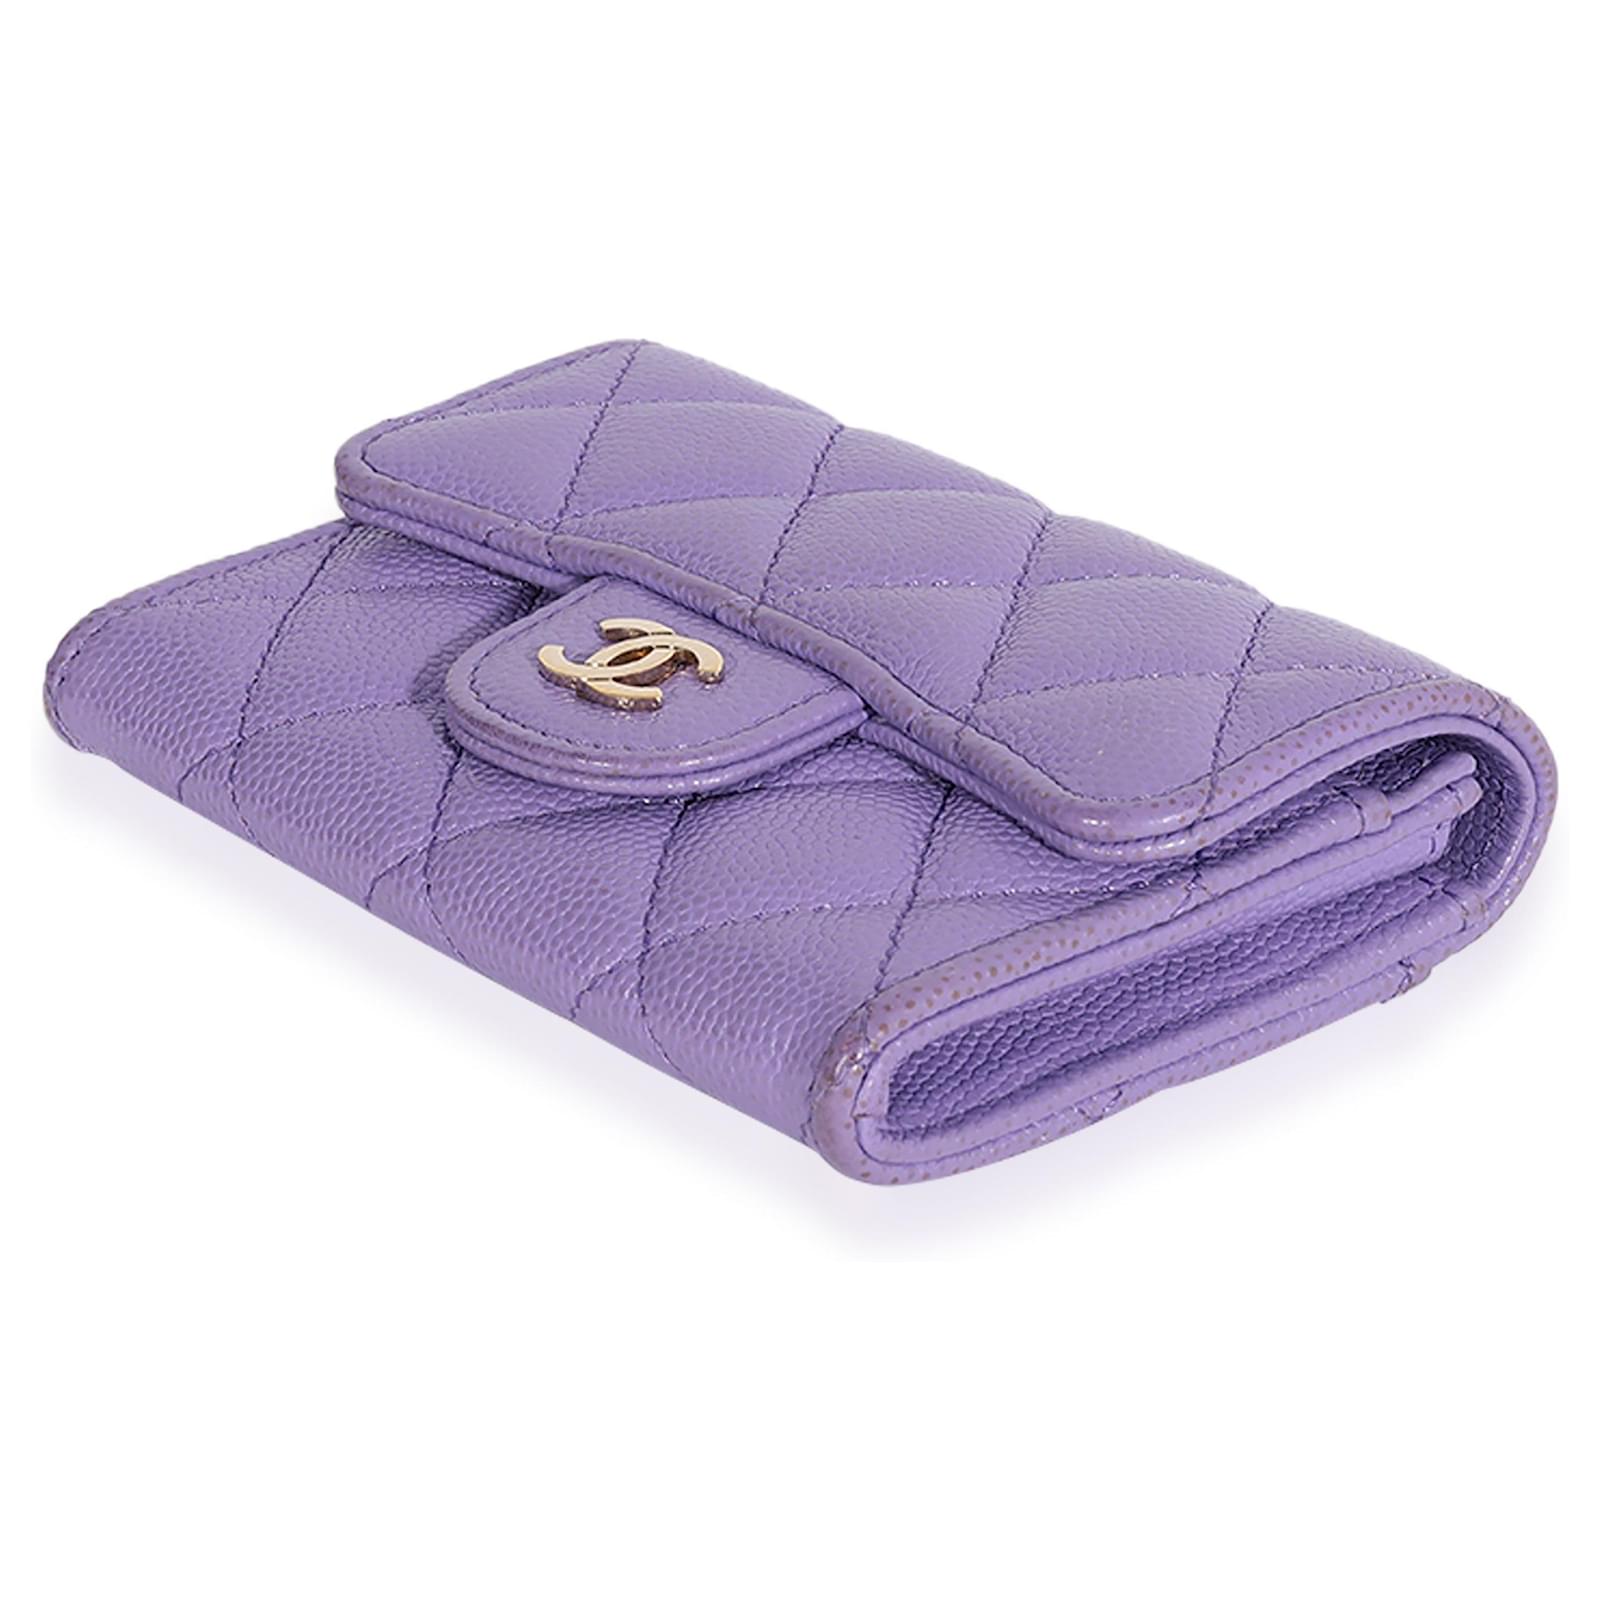 CHANEL Caviar Quilted Filigree Card Holder Purple 977445